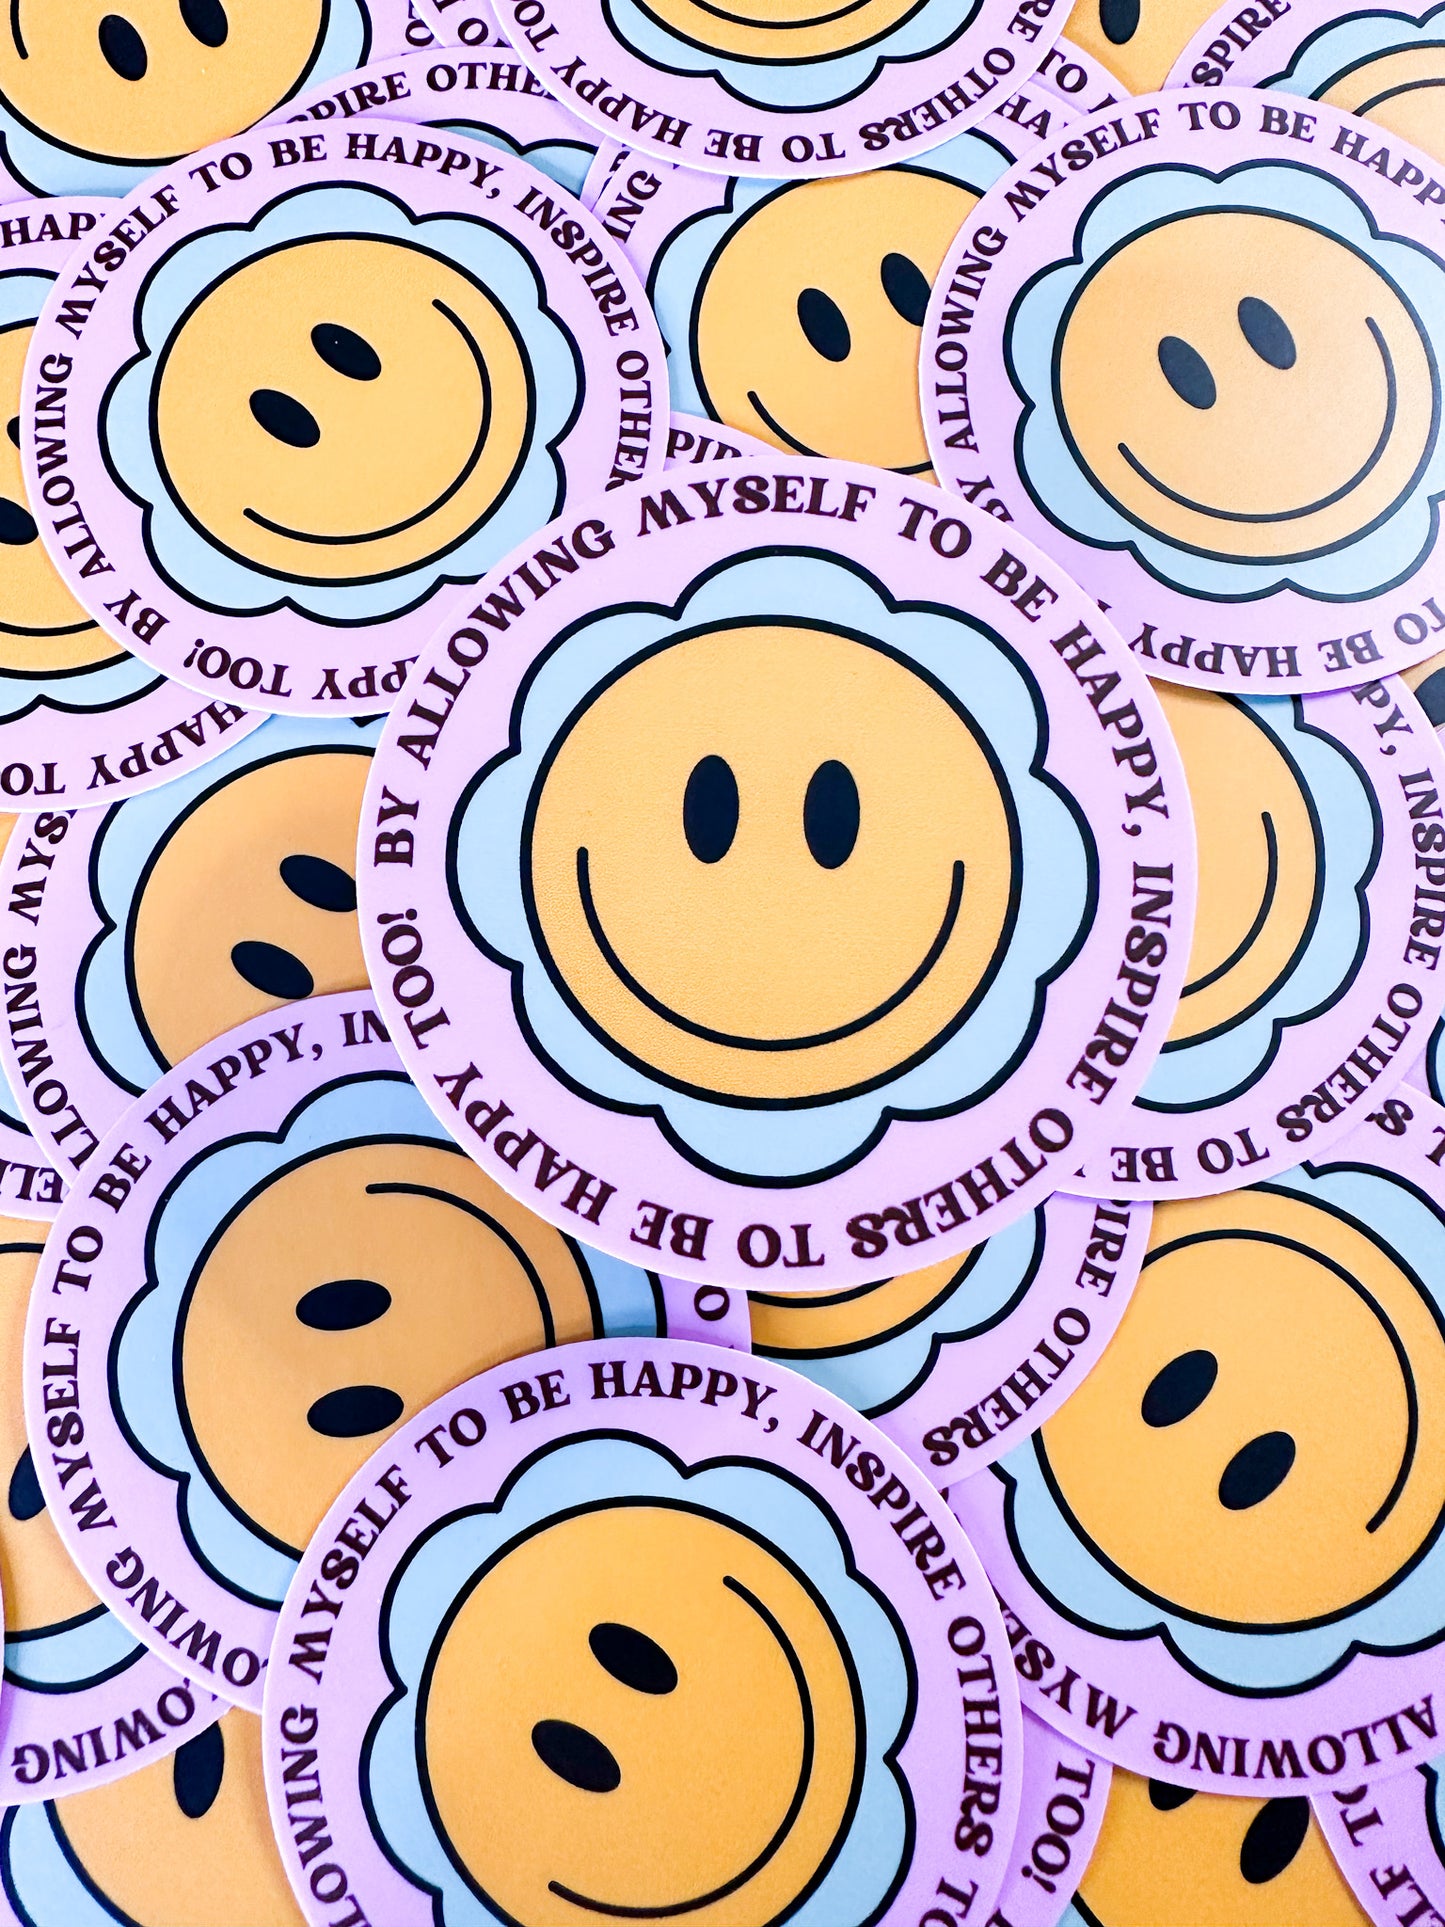 By allowing myself to be happy, inspire others to be happy too! Sticker